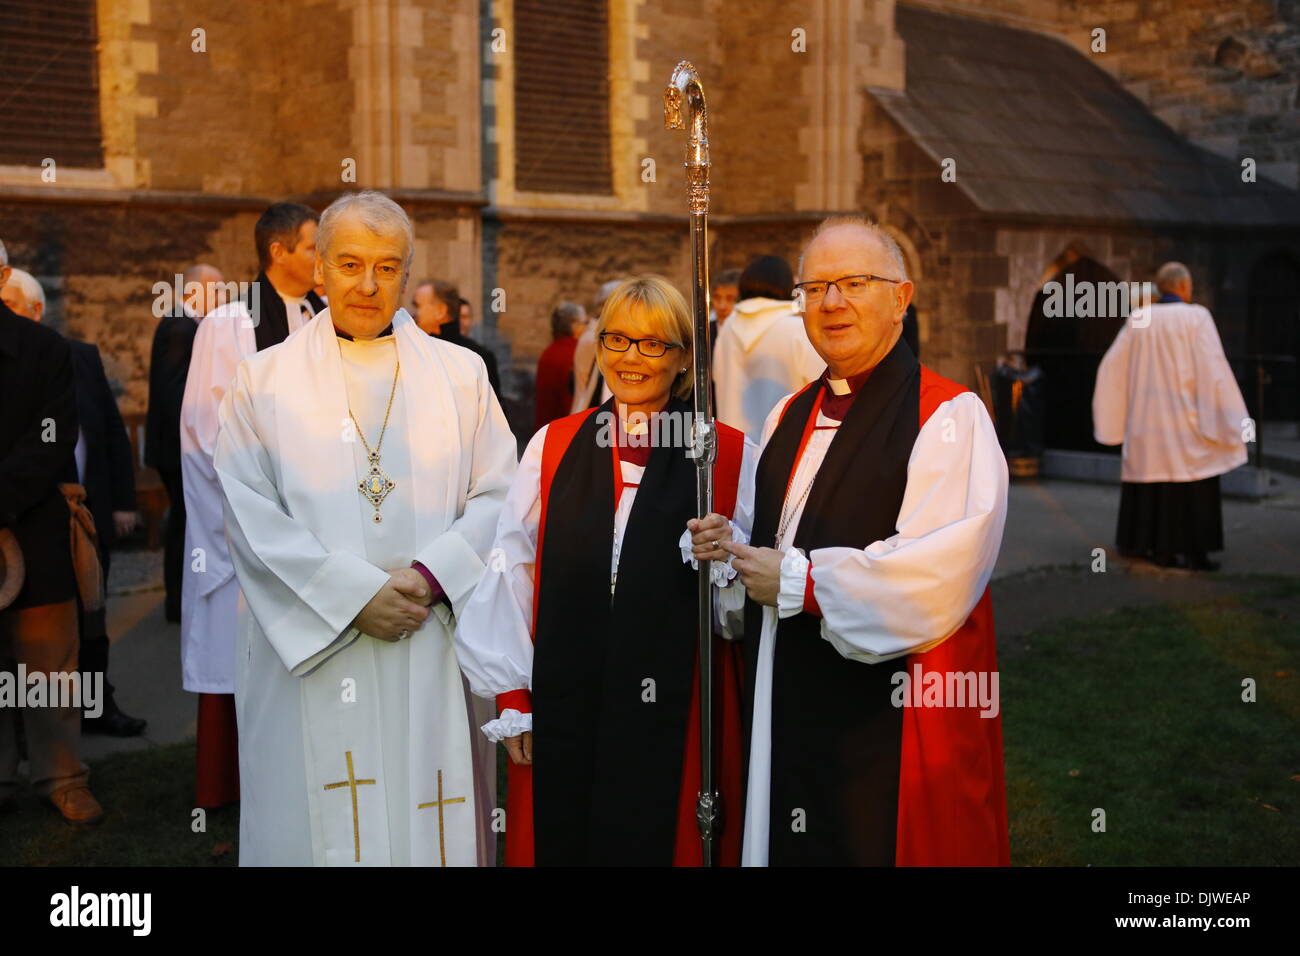 Dublin, Ireland. 30th November 2013. The Bishop of Meath and Kildare the Most Revd Pat Storey (M) is pictured with the Archbishop of Dublin, the Most Revd Dr Michael Jackson (L) and the Archbishop of Armagh, the Most Revd Richard Clarke (R) outside Christ Church Cathedral. The Most Revd Pat Storey has been consecrated as Church of Ireland Bishop of Meath and Kildare in Dublin's Christ Church Cathedral. Credit:  Michael Debets/Alamy Live News Stock Photo